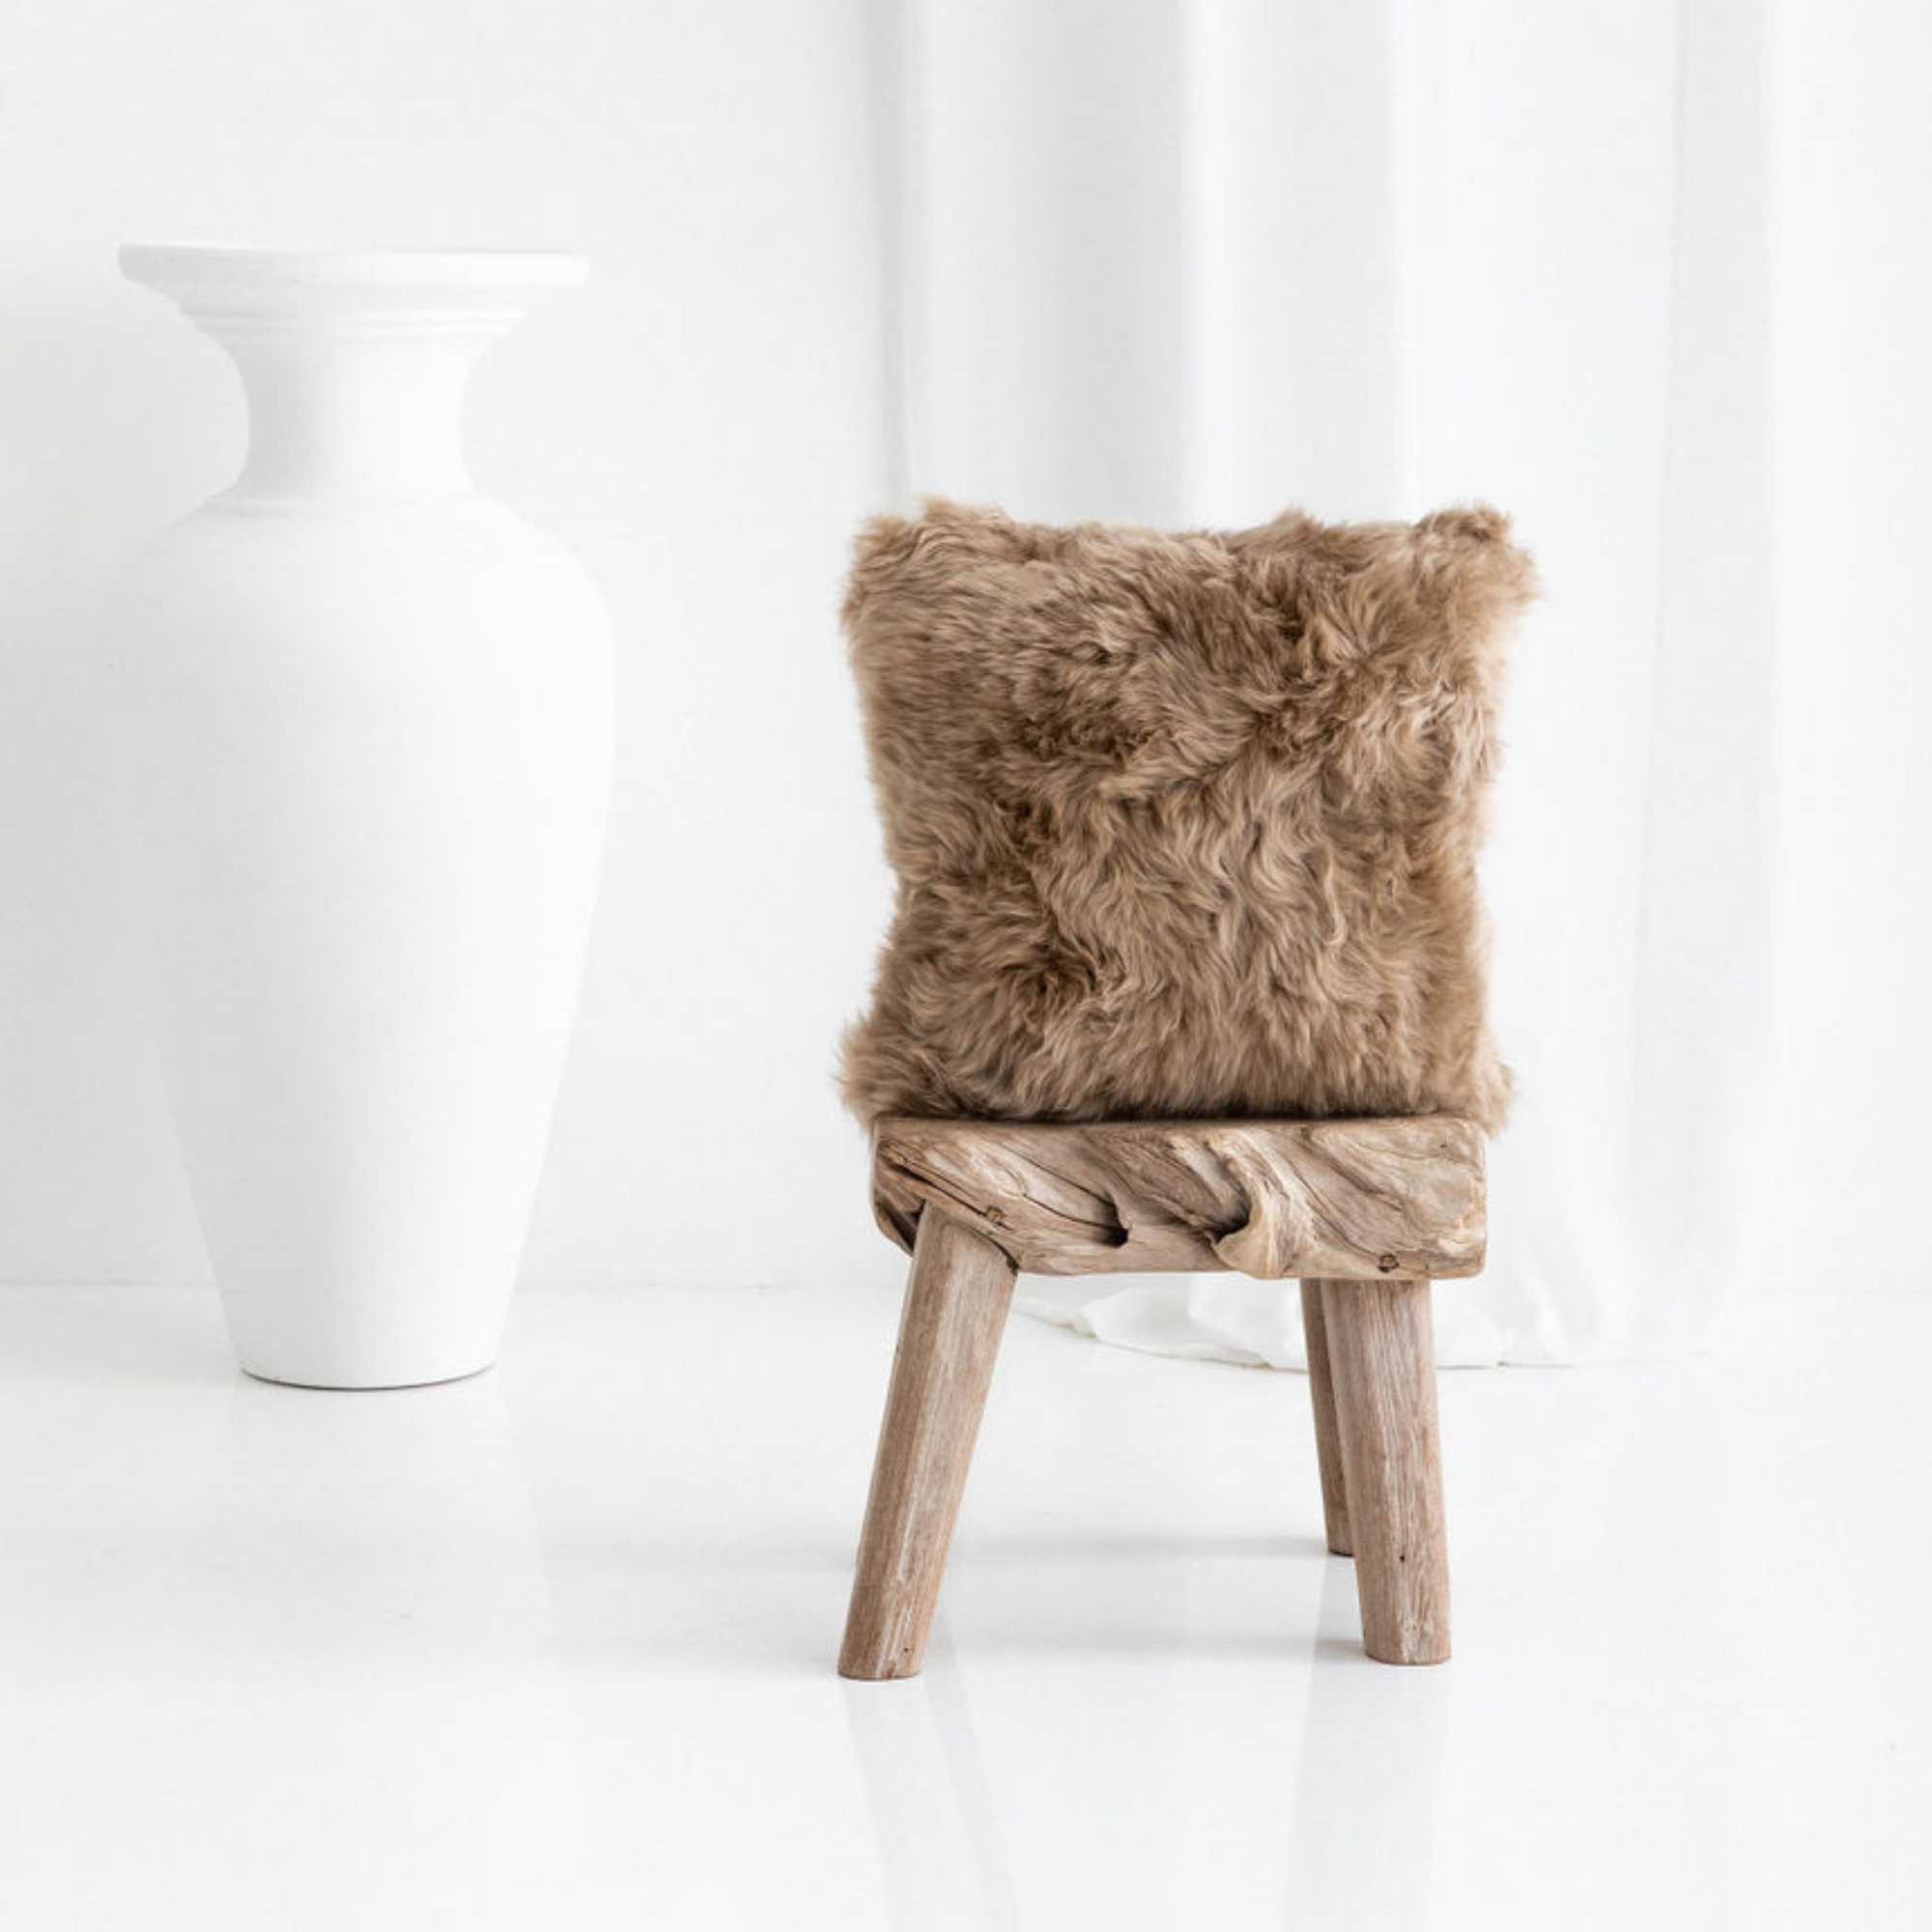 Add the premium Hawkesbury Sheepskin Cushion to your collection for a luxury hit of the softest all natural texture. Available in 2 sizes and an array of beautiful neutral hues, our shee